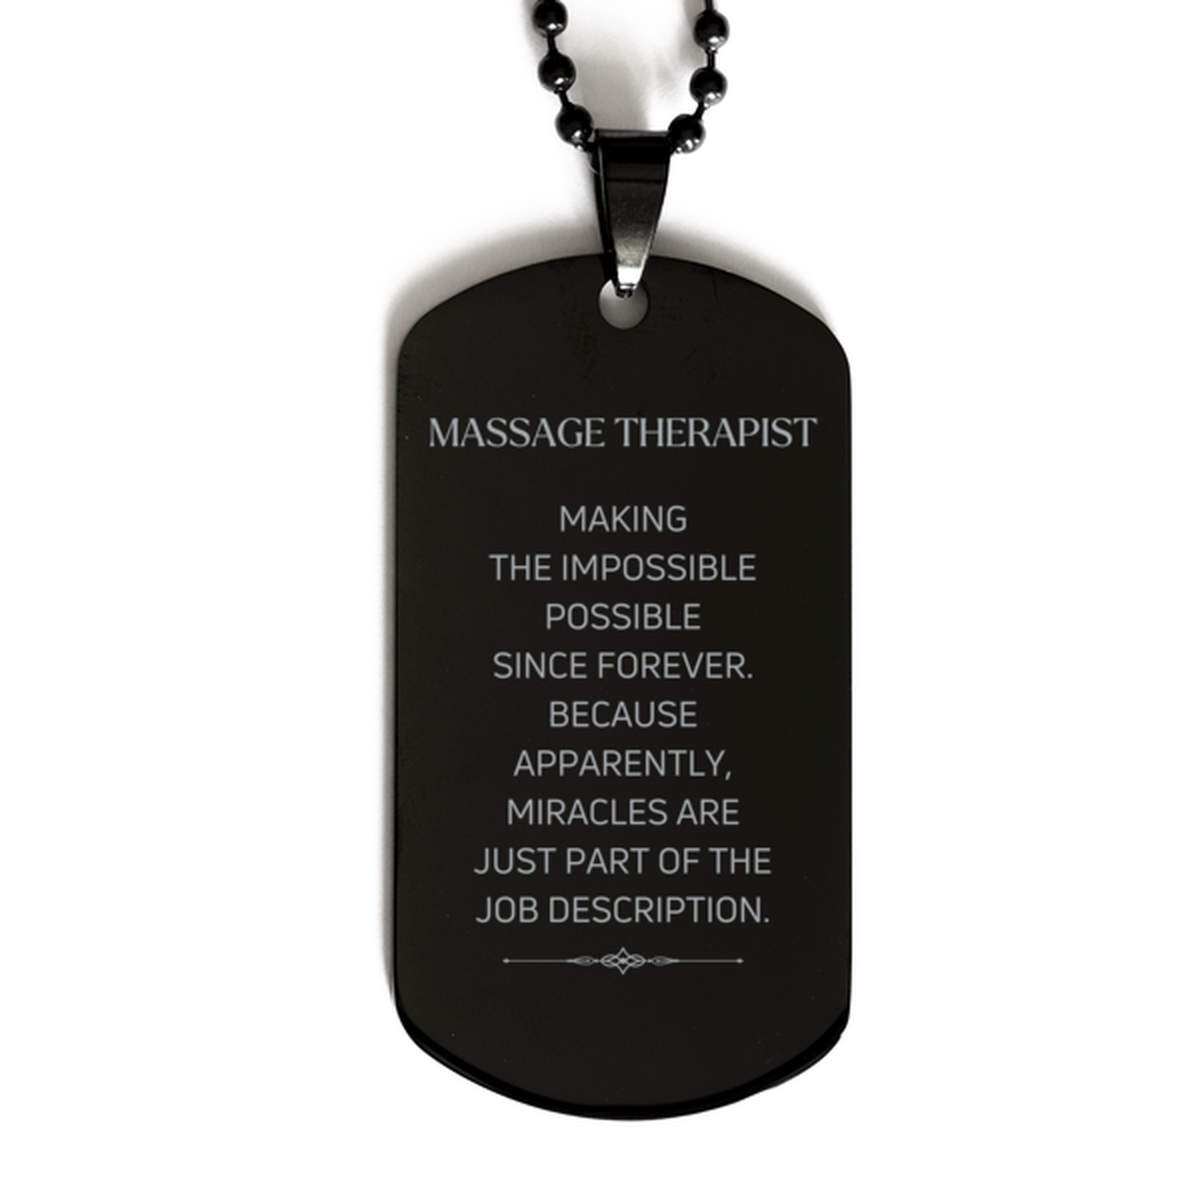 Funny Massage Therapist Gifts, Miracles are just part of the job description, Inspirational Birthday Black Dog Tag For Massage Therapist, Men, Women, Coworkers, Friends, Boss